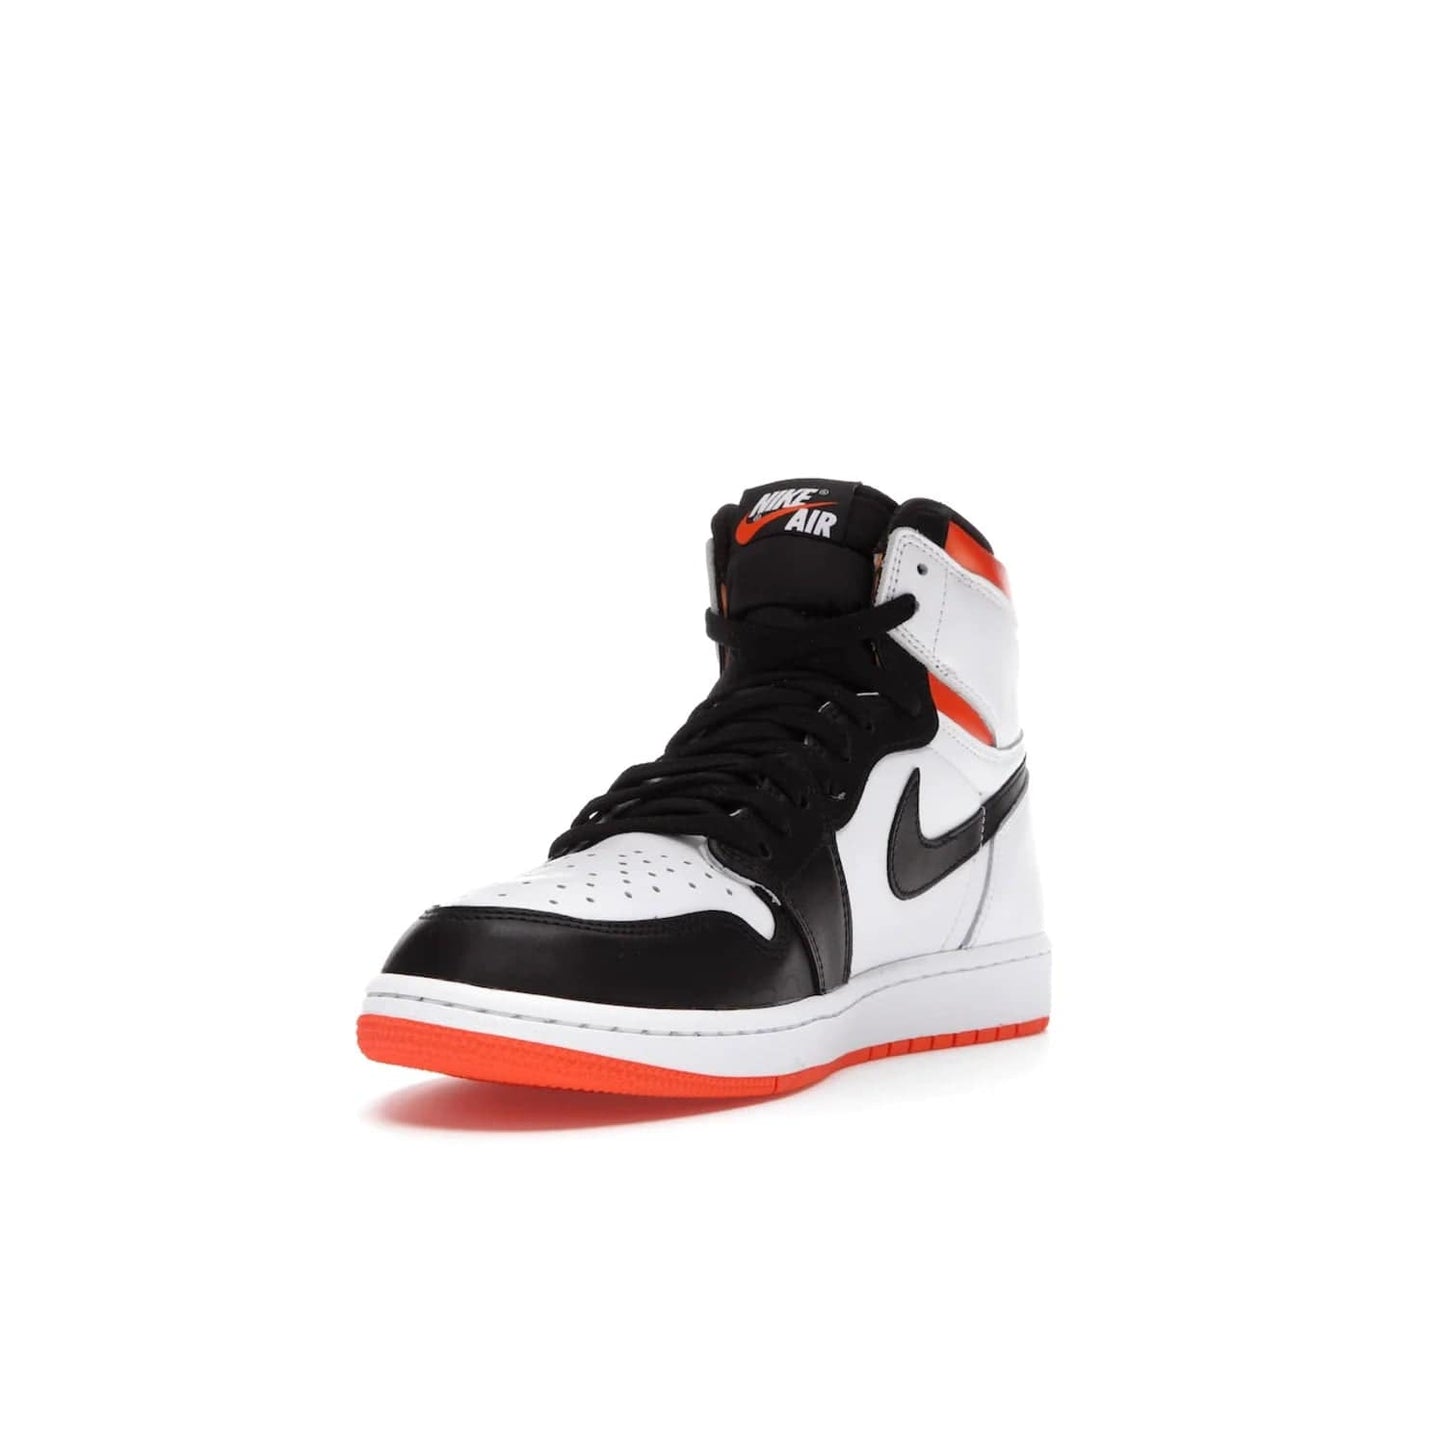 Jordan 1 Retro High Electro Orange - Image 13 - Only at www.BallersClubKickz.com - This Air Jordan 1 Retro High Electro Orange features a white leather upper with black overlays and vibrant Hyper Orange ankle wrap. Turn heads with this iconic design of woven tongue label and sole. Get yours today and add some serious style to your rotation.